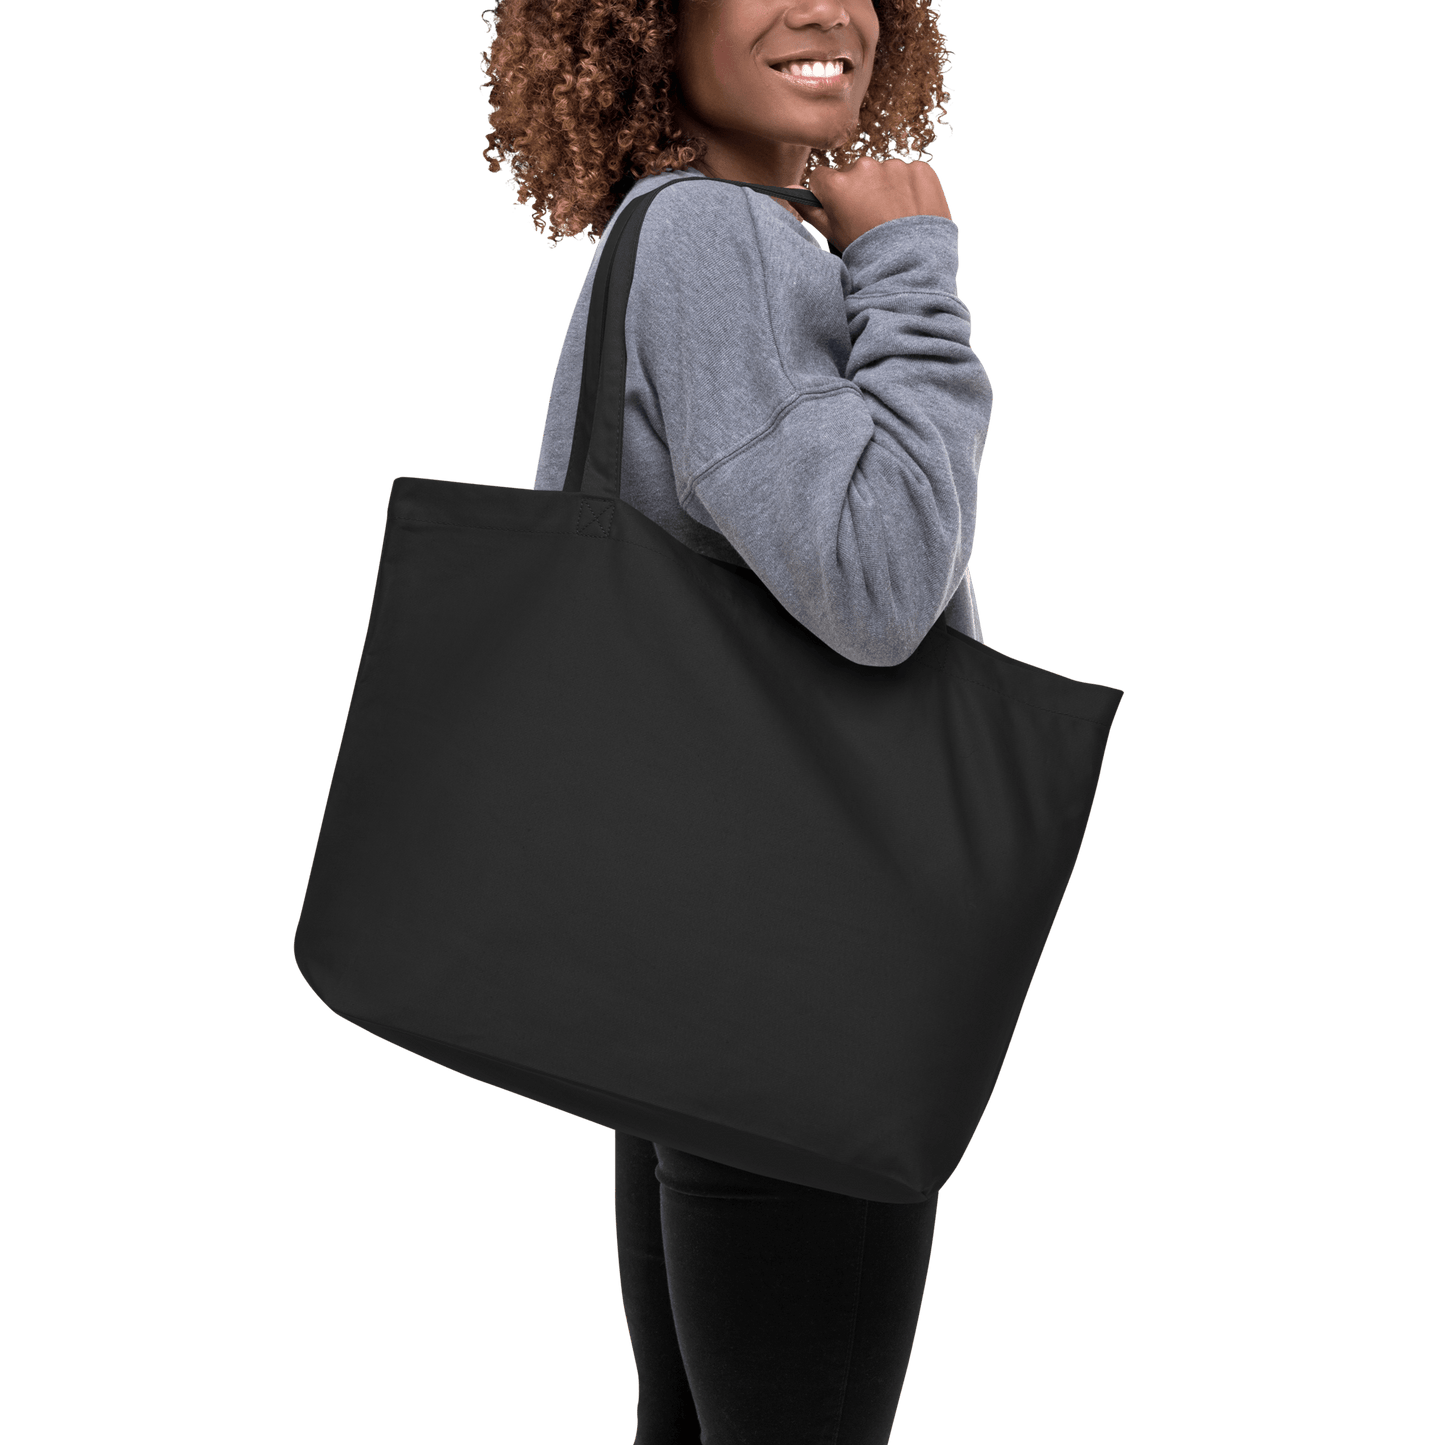 GFPA Large Eco Tote Bag - Girl From Peel Apparel - Tote